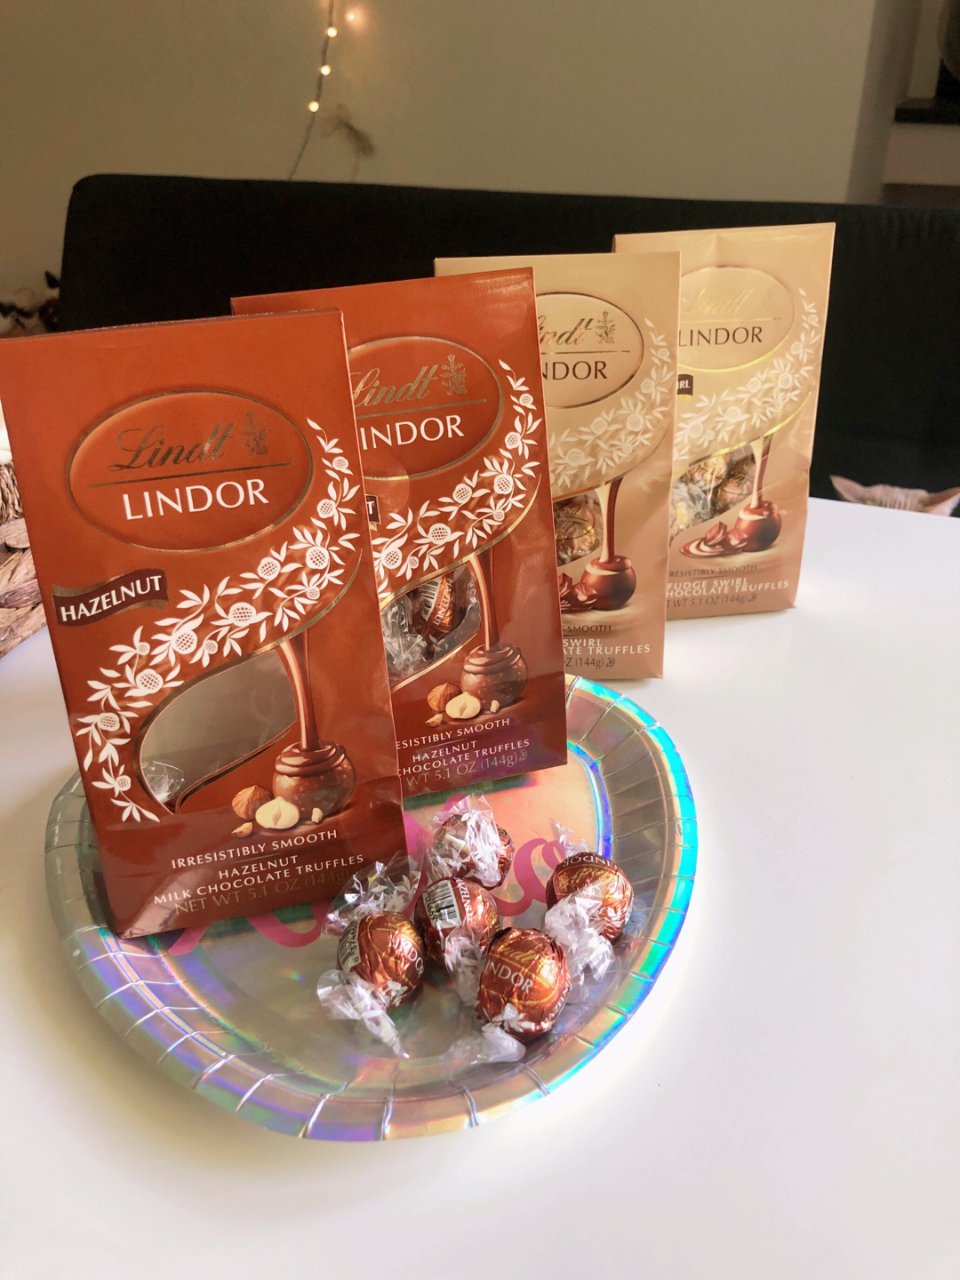 Lindt 瑞士莲,Free movie download,fandango,5oz or greater